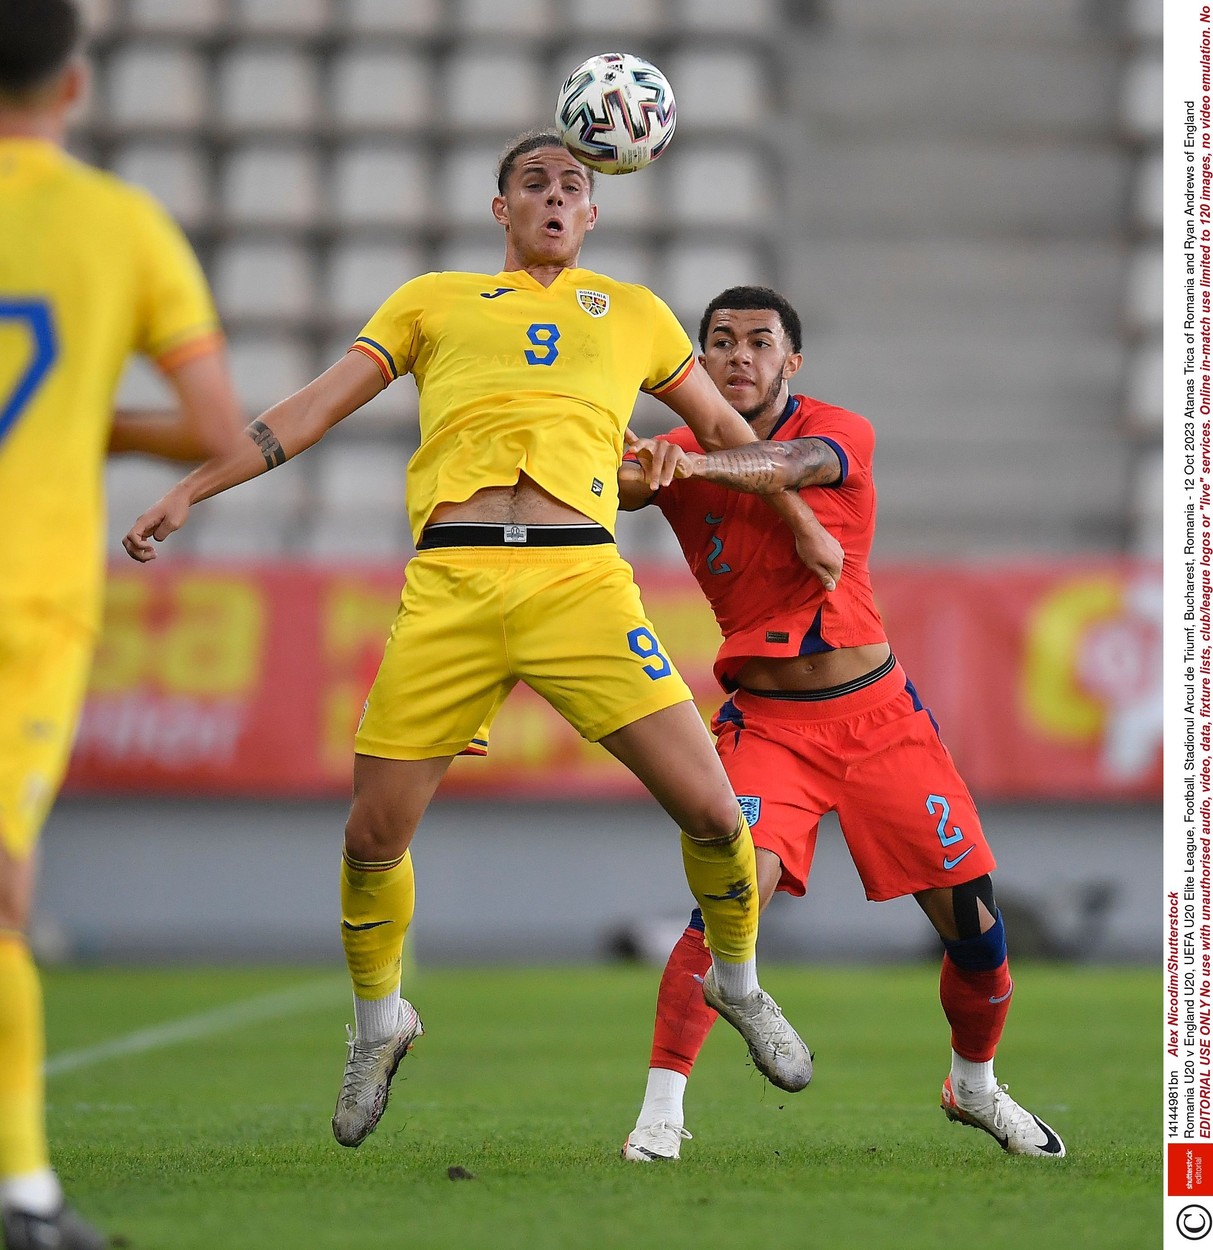 Atanas Trica of Romania and Ryan Andrews of England
Romania U20 v England U20, UEFA U20 Elite League, Football, Stadionul Arcul de Triumf, Bucharest, Romania - 12 Oct 2023,Image: 813216819, License: Rights-managed, Restrictions: EDITORIAL USE ONLY No use with unauthorised audio, video, data, fixture lists, club/league logos or 